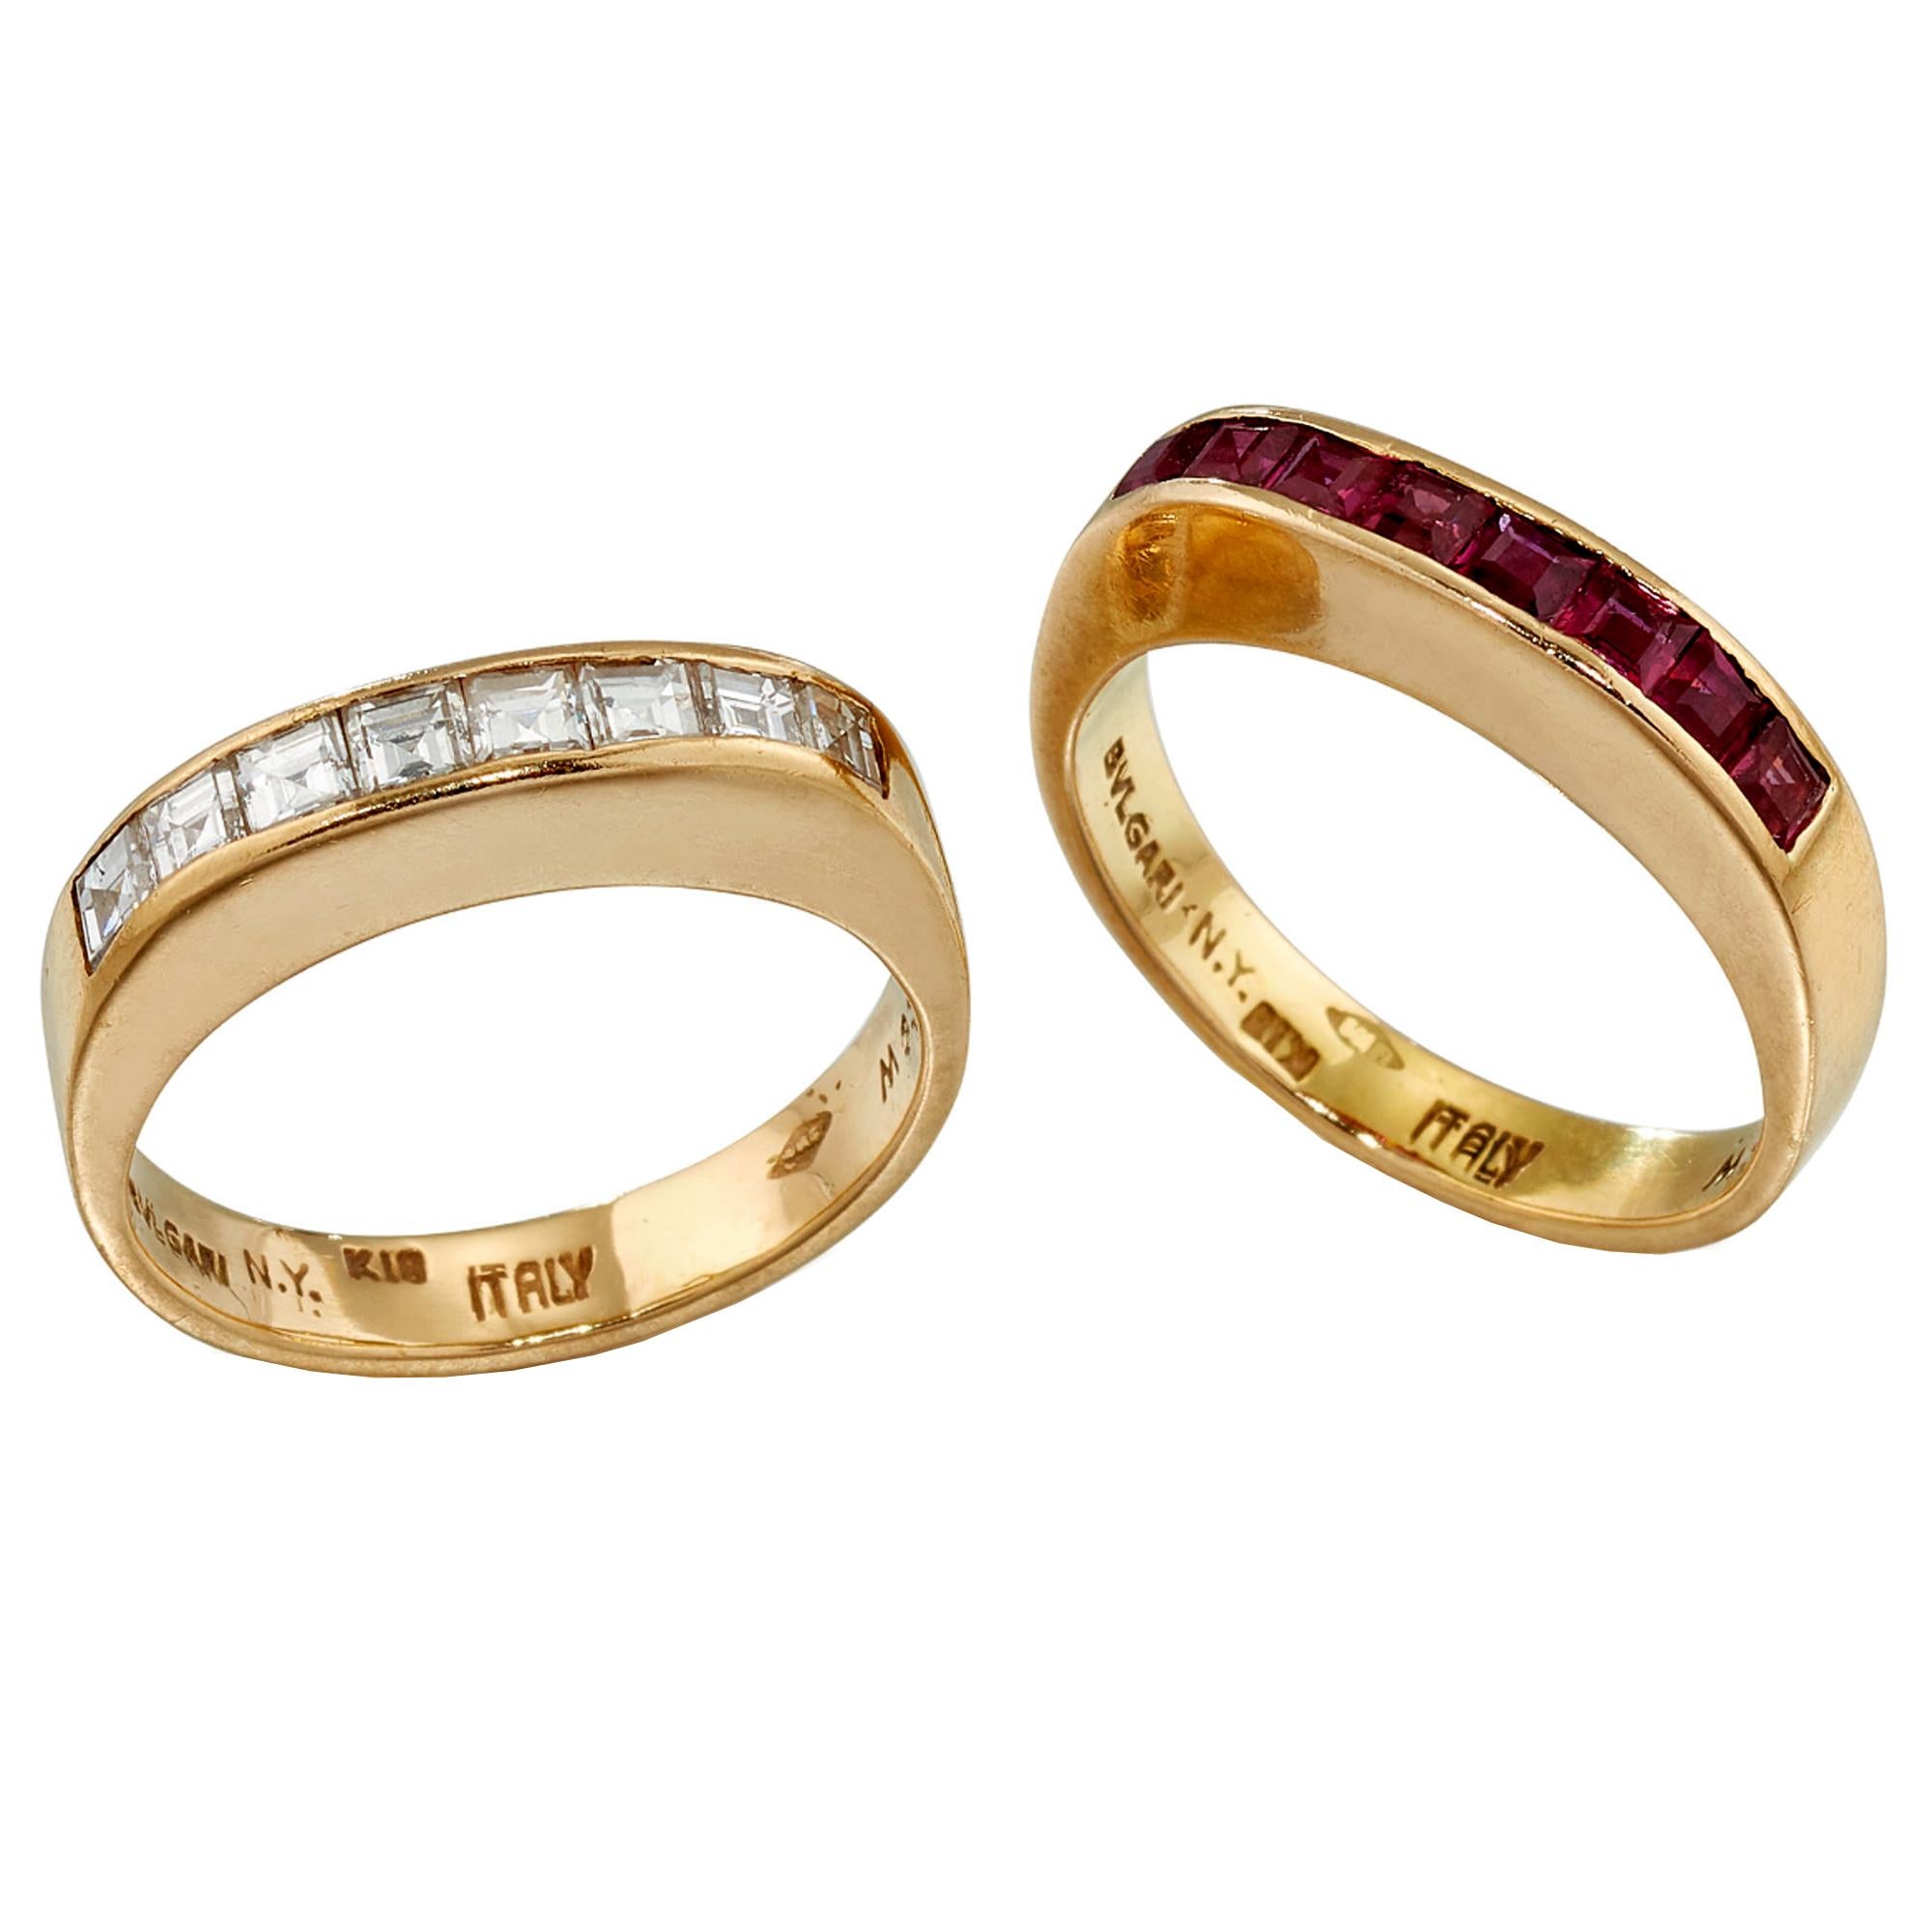 An impressive suite by Bulgari showcasing calibre cut rubies and carre cut diamonds set in timeless 18k yellow gold. The suite is circa 1980's. The rings measure a size 6 and 6 1/4 and can be resized.